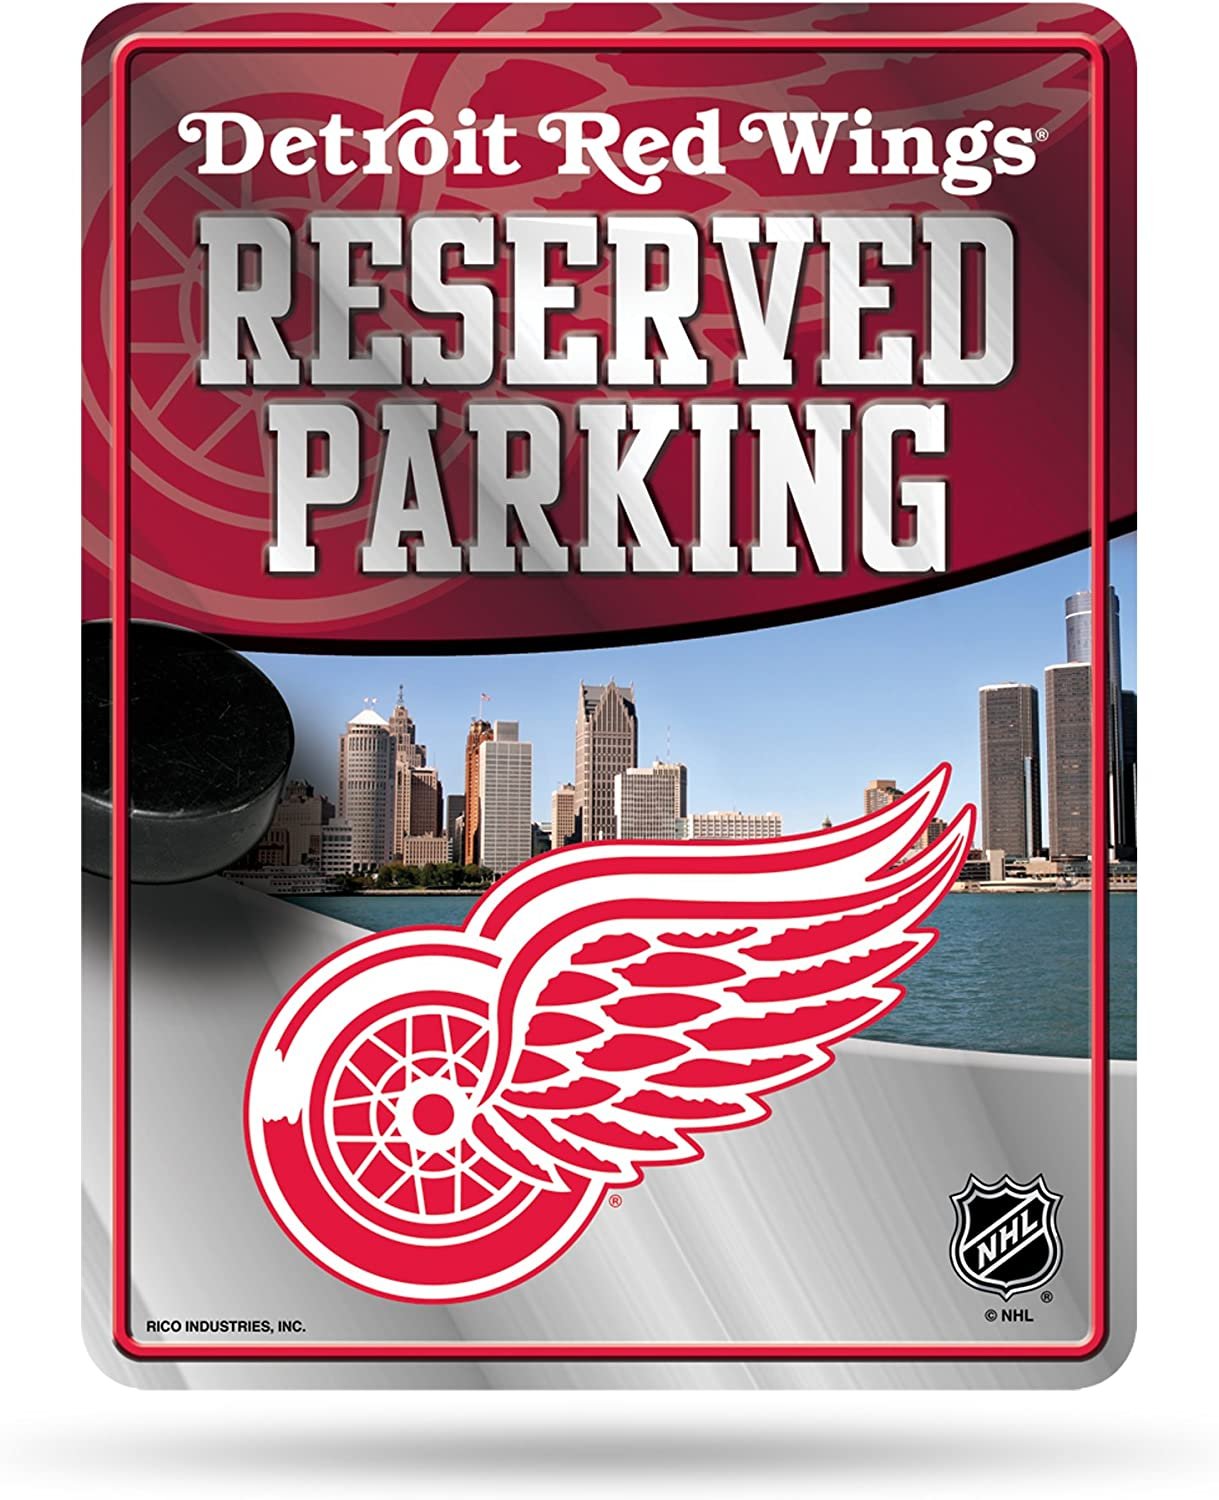 Detroit Red Wings Metal Parking Novelty Wall Sign 8.5 x 11 Inch